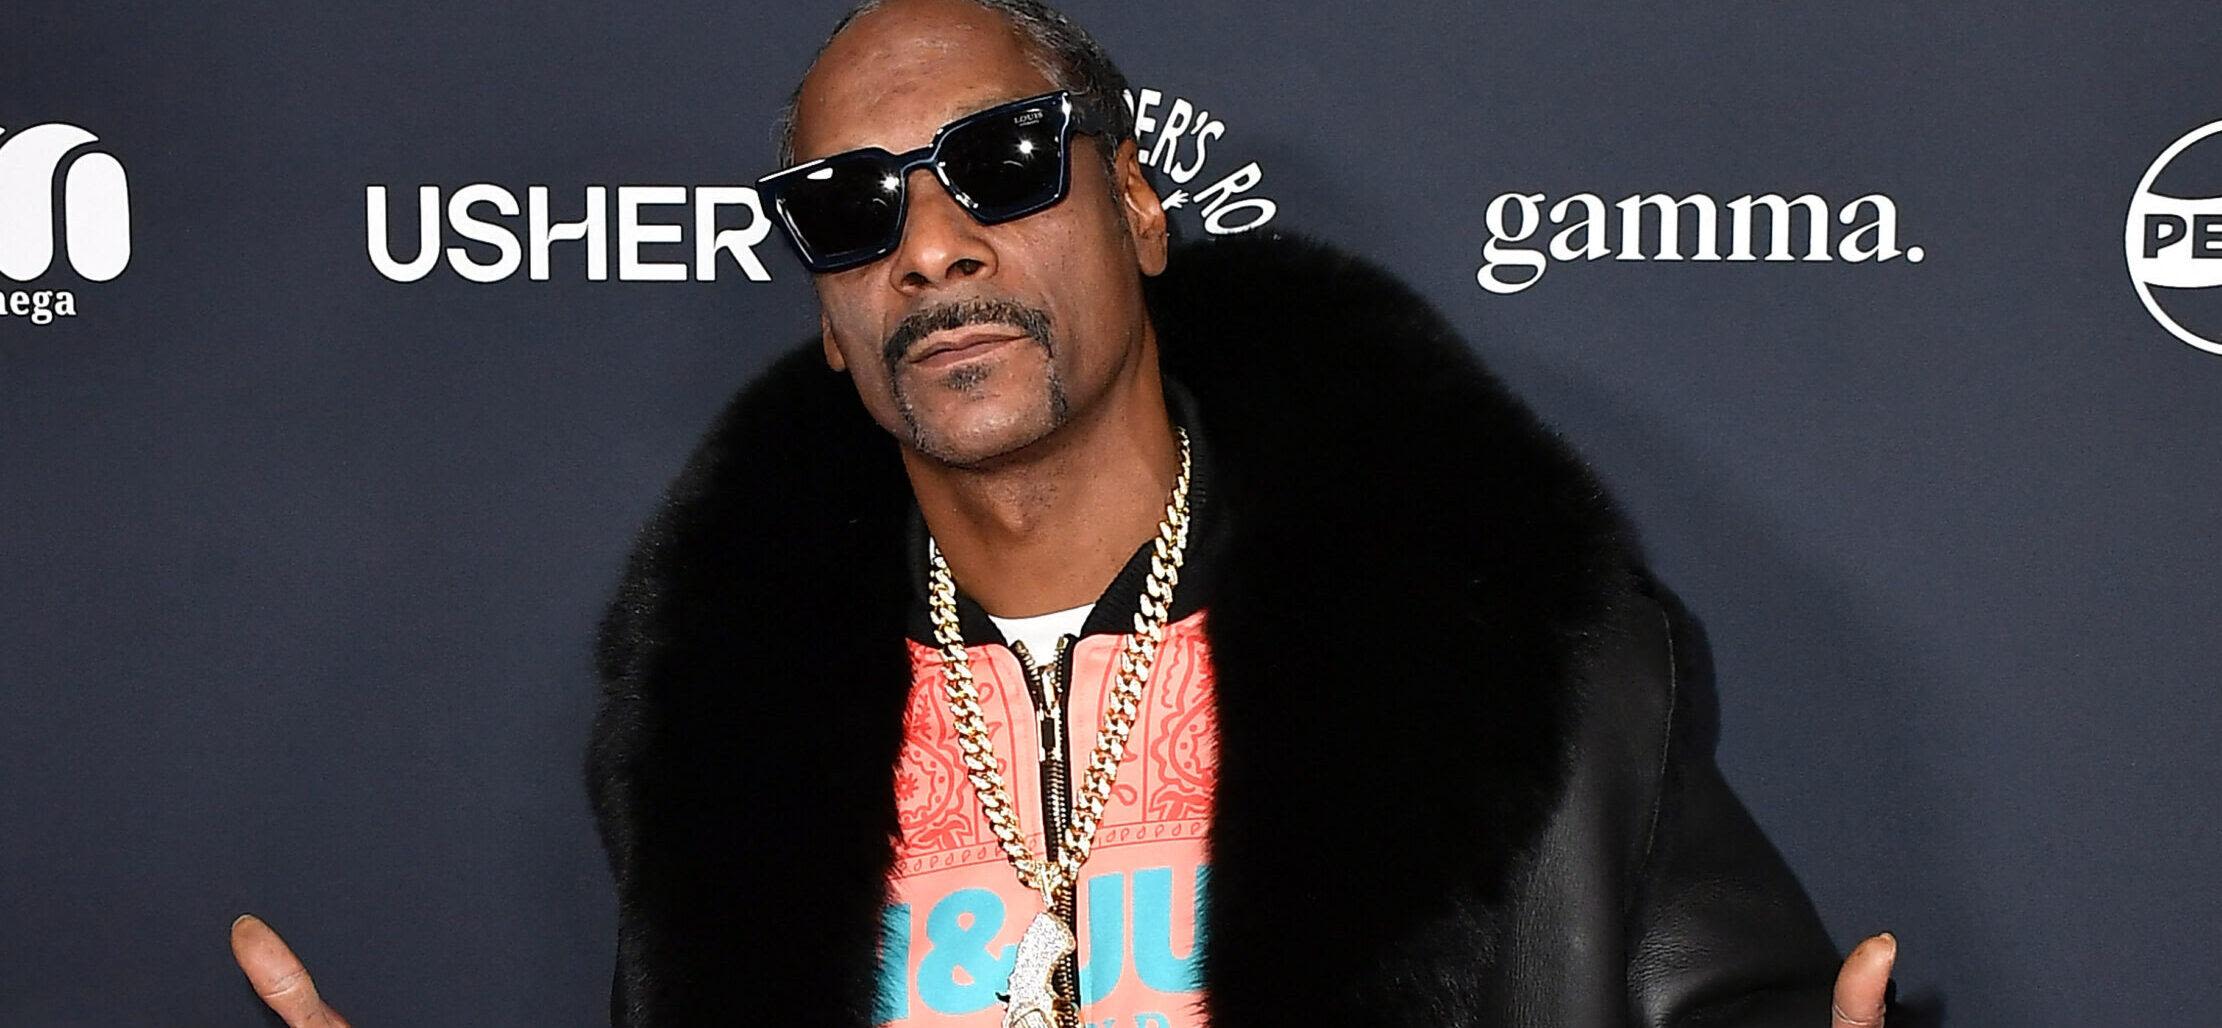 Snoop Dogg Blazes New Trail With First Cannabis Store: S.W.E.D.